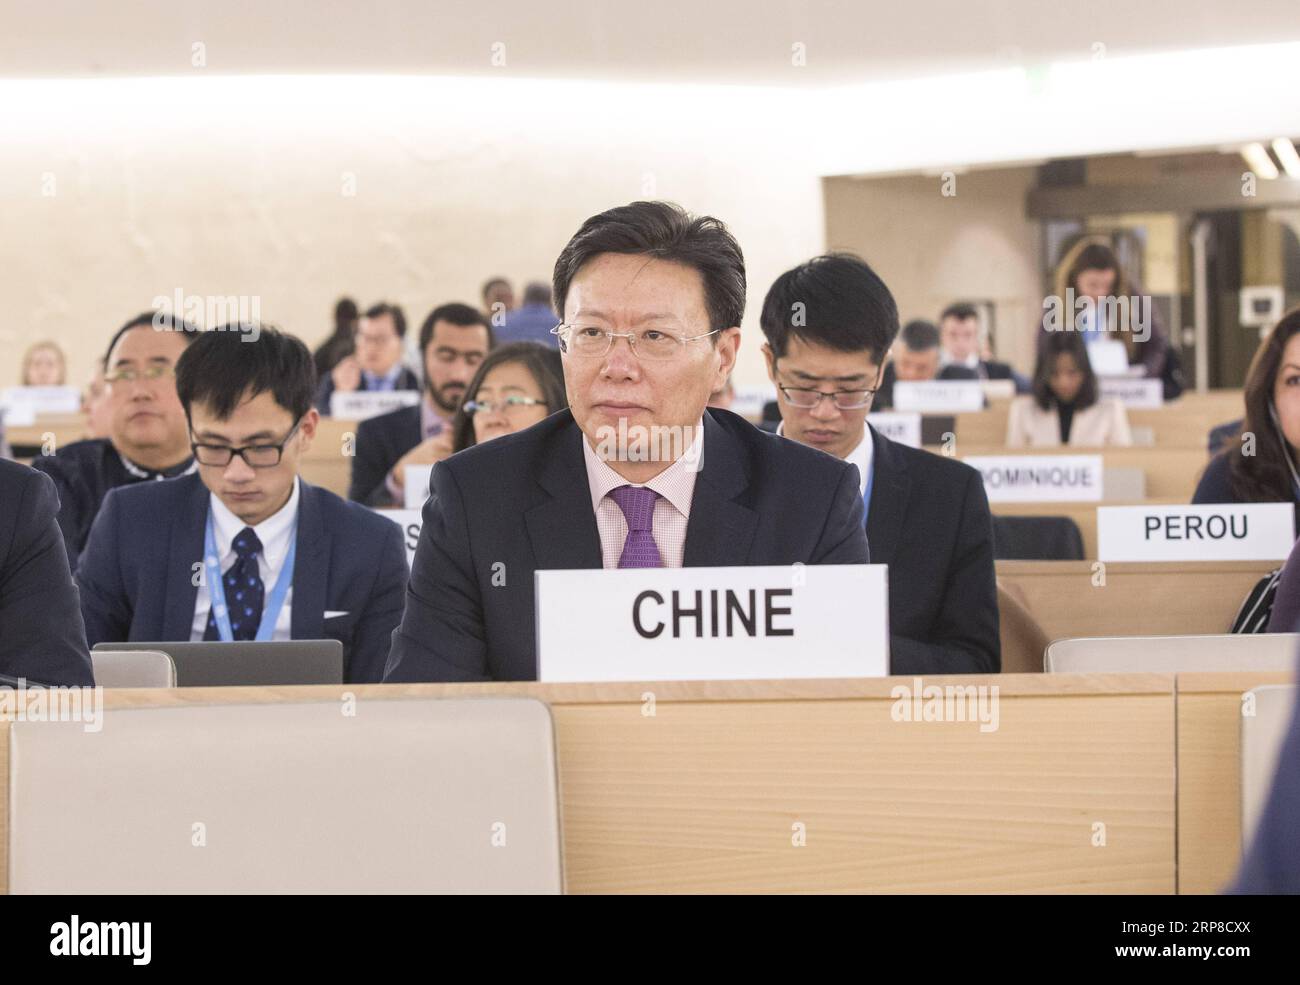 (190228) -- GENEVA, Feb. 28, 2019 (Xinhua) -- Yu Jianhua, head of the Chinese Mission to the UN Office in Geneva, attends the 40th session of the UN Human Rights Council (UNHRC) in Geneva, Switzerland, Feb. 27, 2019. The 56 ethnic groups in China, living together like brothers and sisters, are all parts of the big family of the Chinese nation, Yu Jianhua told the UNHRC session. The people of all ethnic groups are tightly held together like pomegranate seeds, and together they are making arduous efforts for the great rejuvenation of the Chinese nation where they can all live a happy life, Yu sa Stock Photo